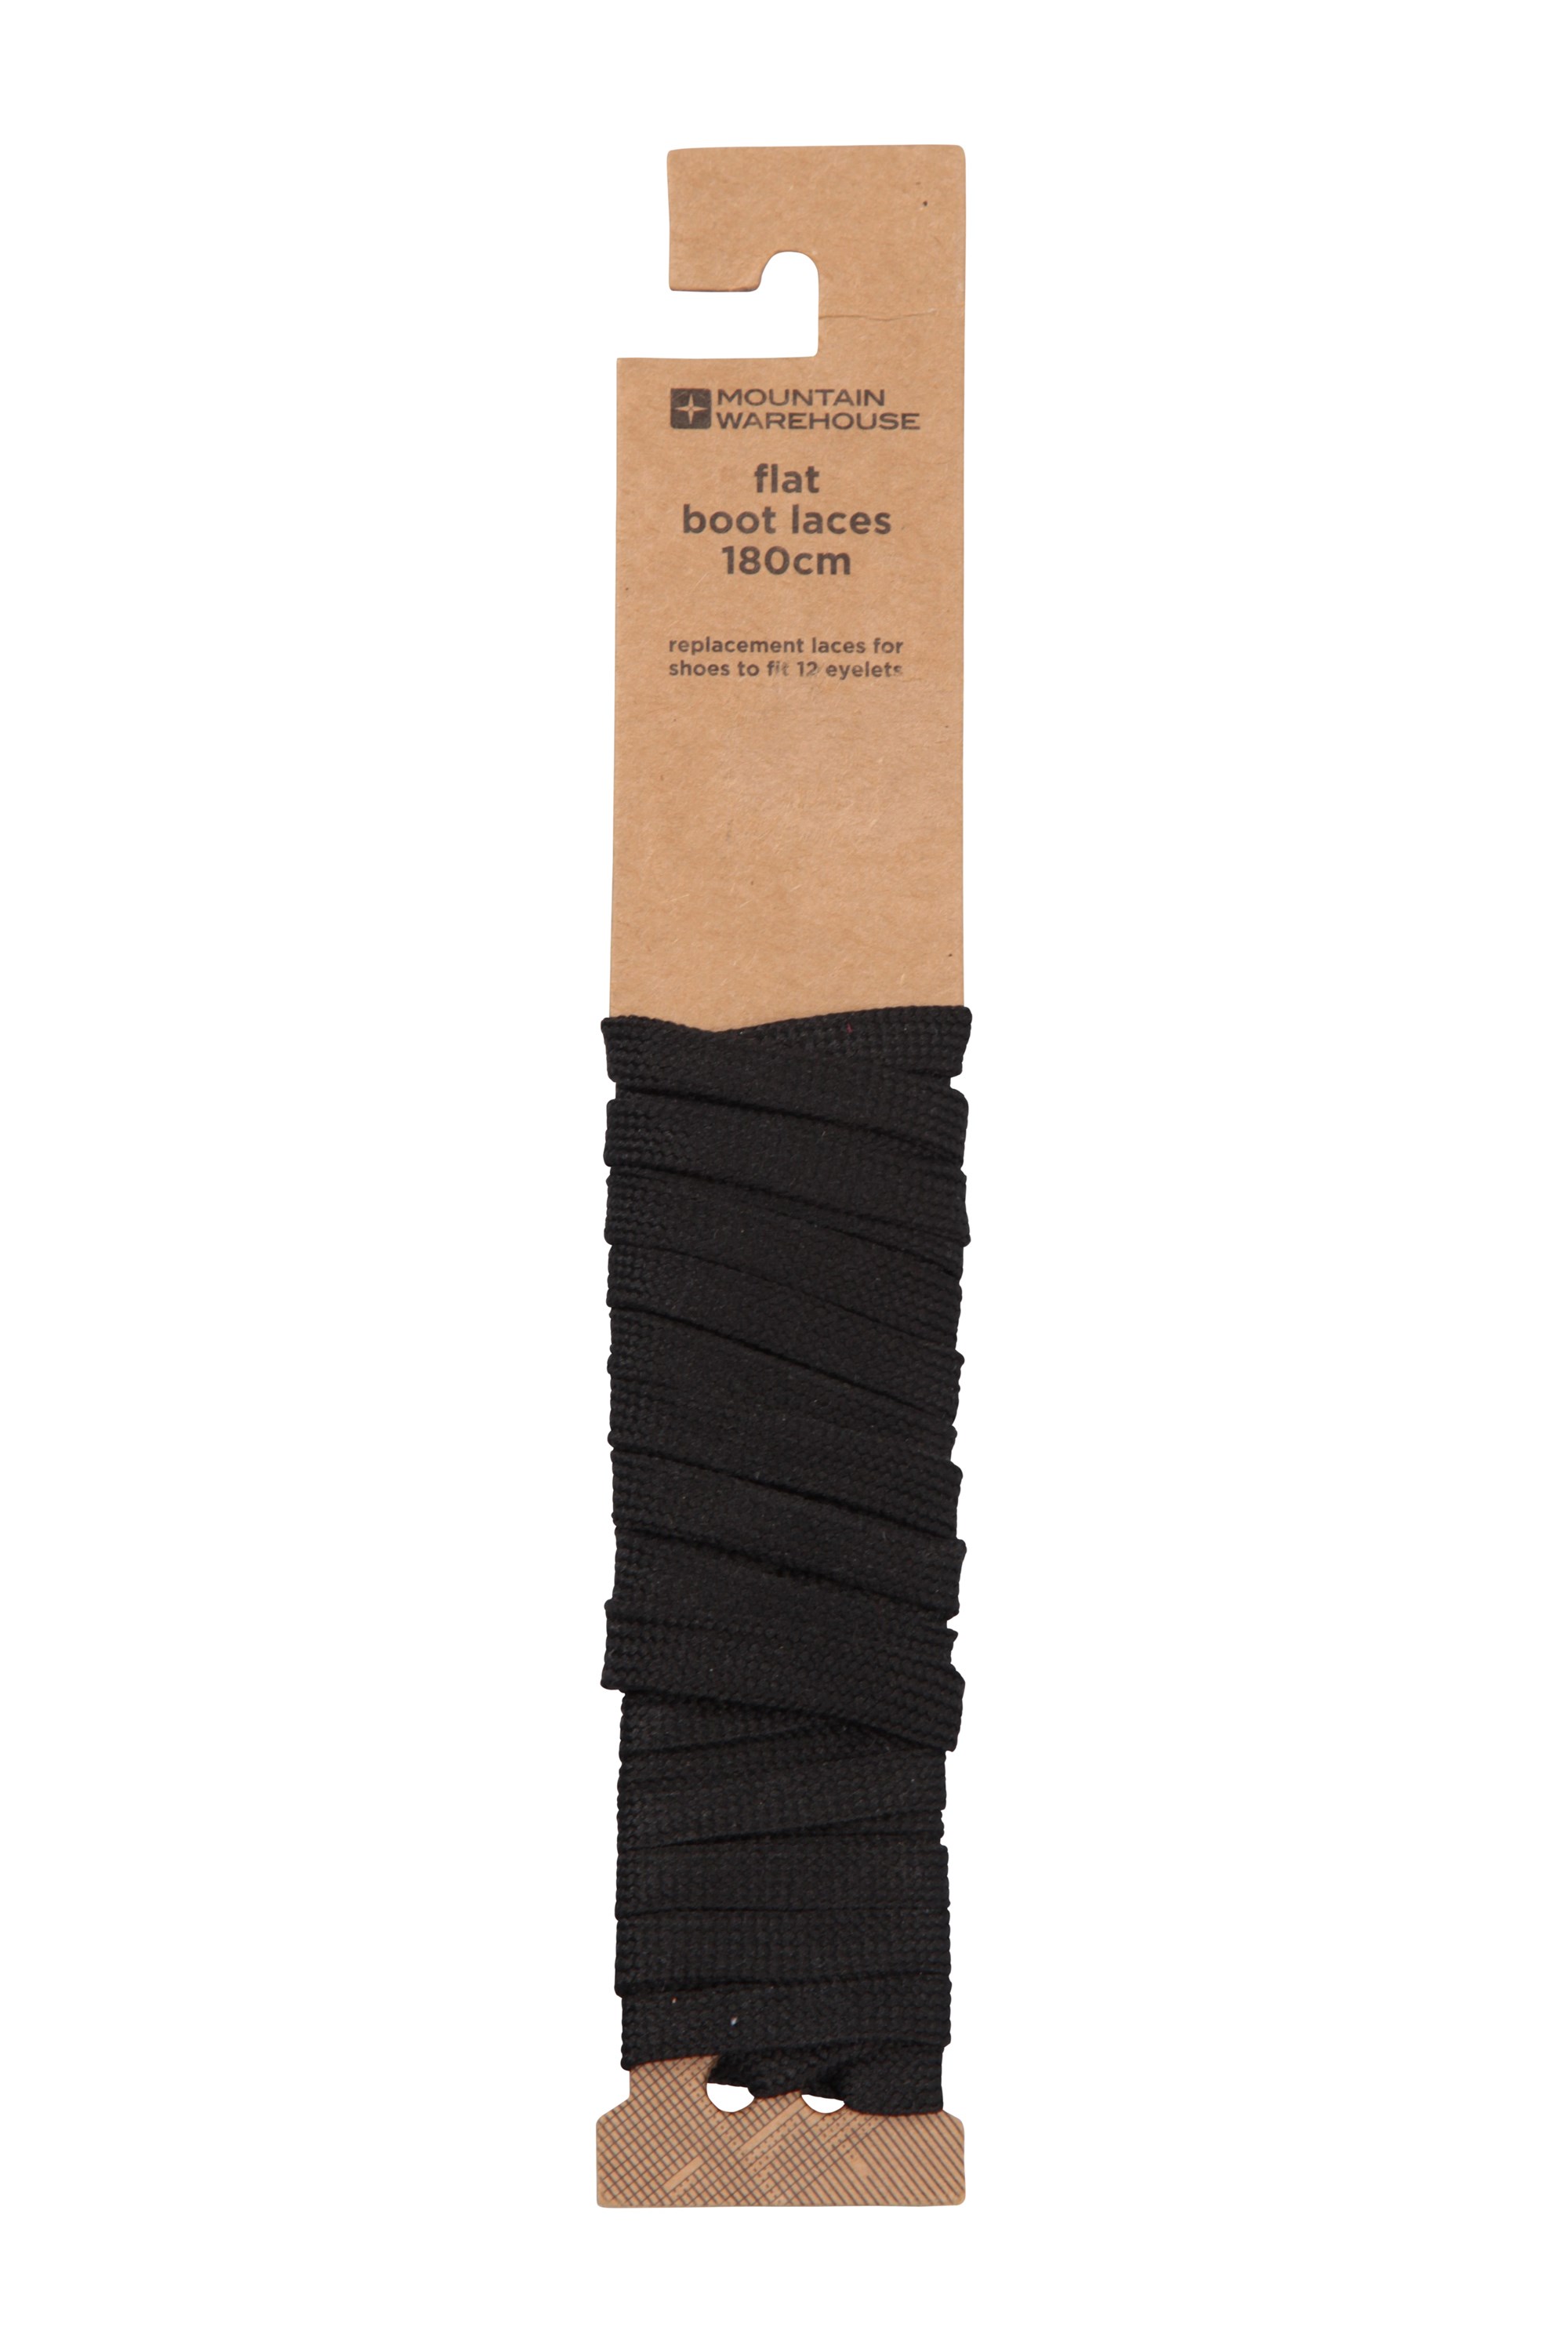 Flat Boot Laces - 180cm | Mountain 